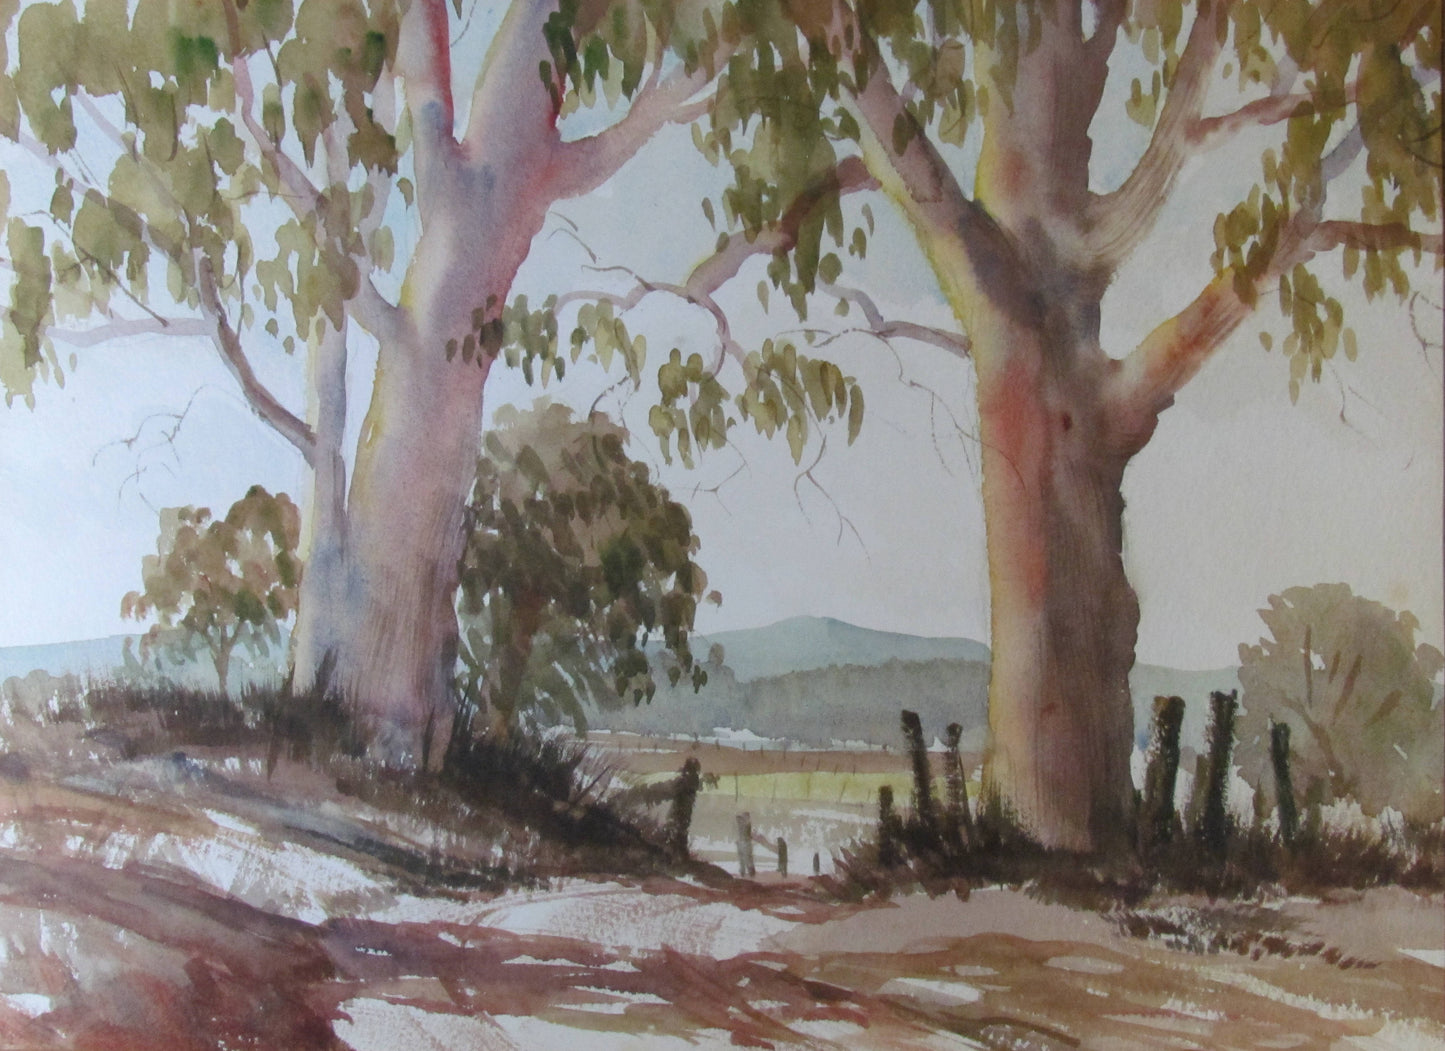 Pencil Signed Watercolour Australian Landscape Between The Trees